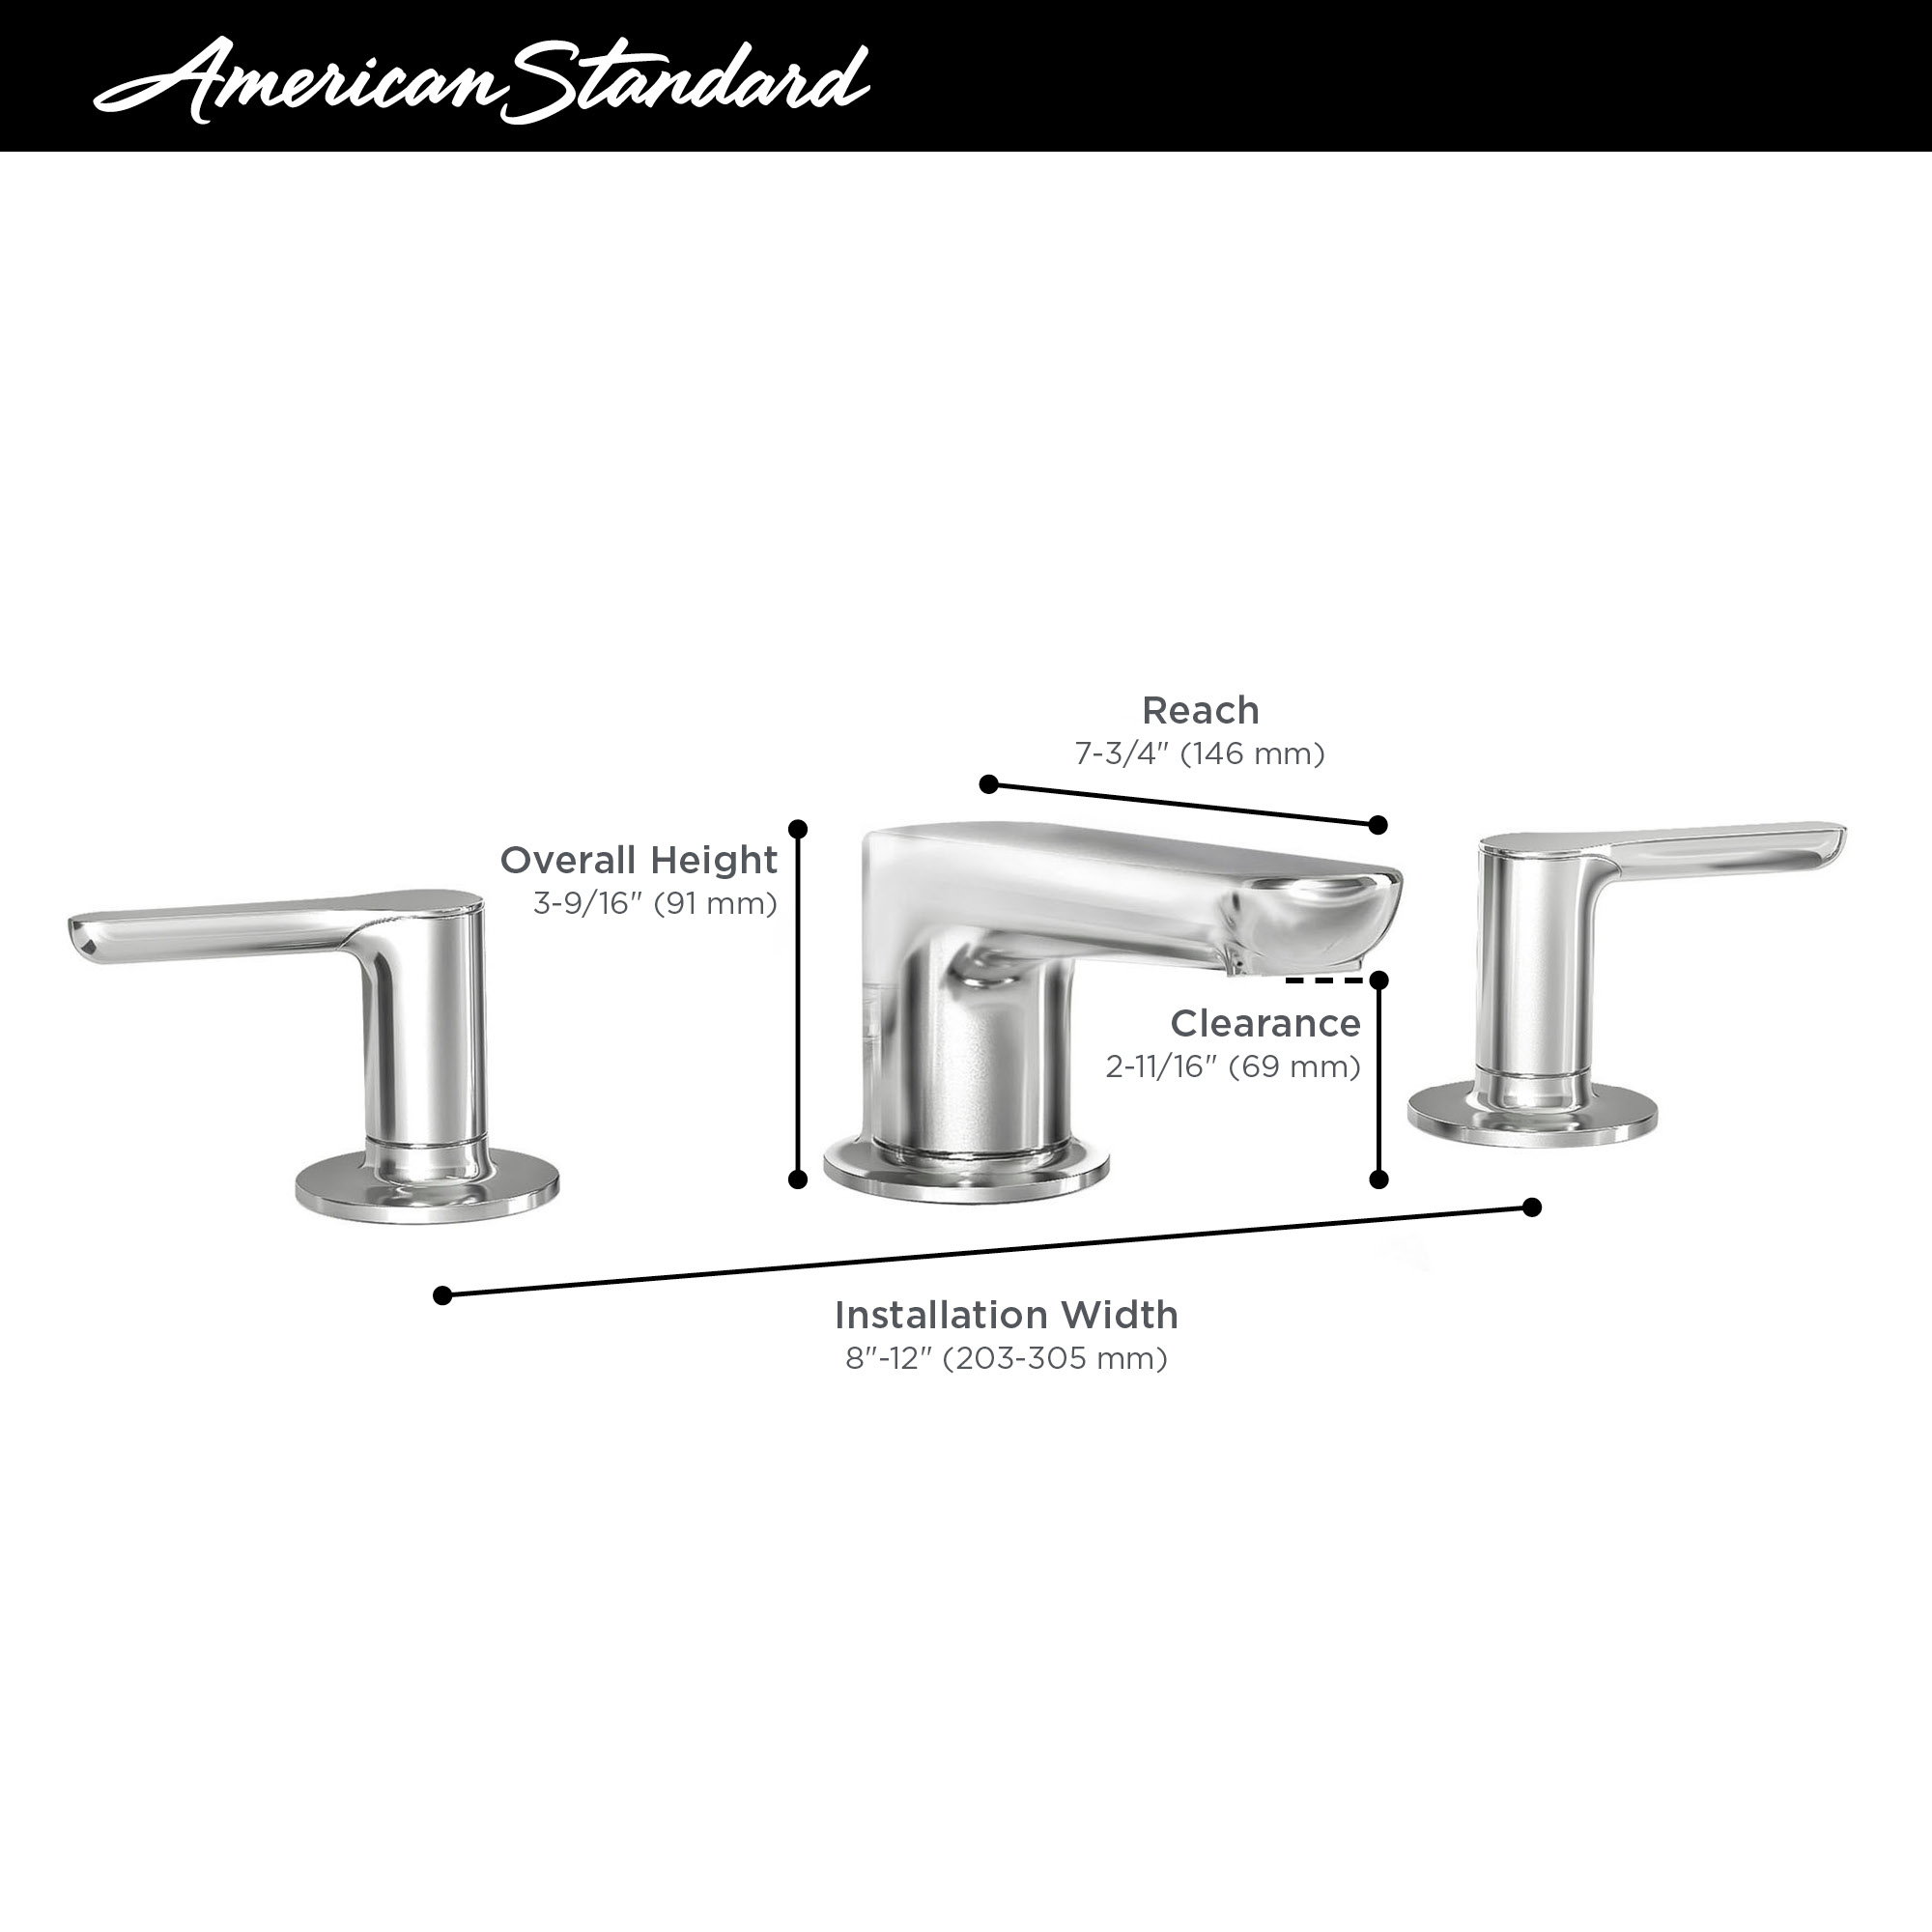 Studio™ S Widespread Low Spout Lever Handles 1.2 gpm/4.5 L/min With Lever Handles